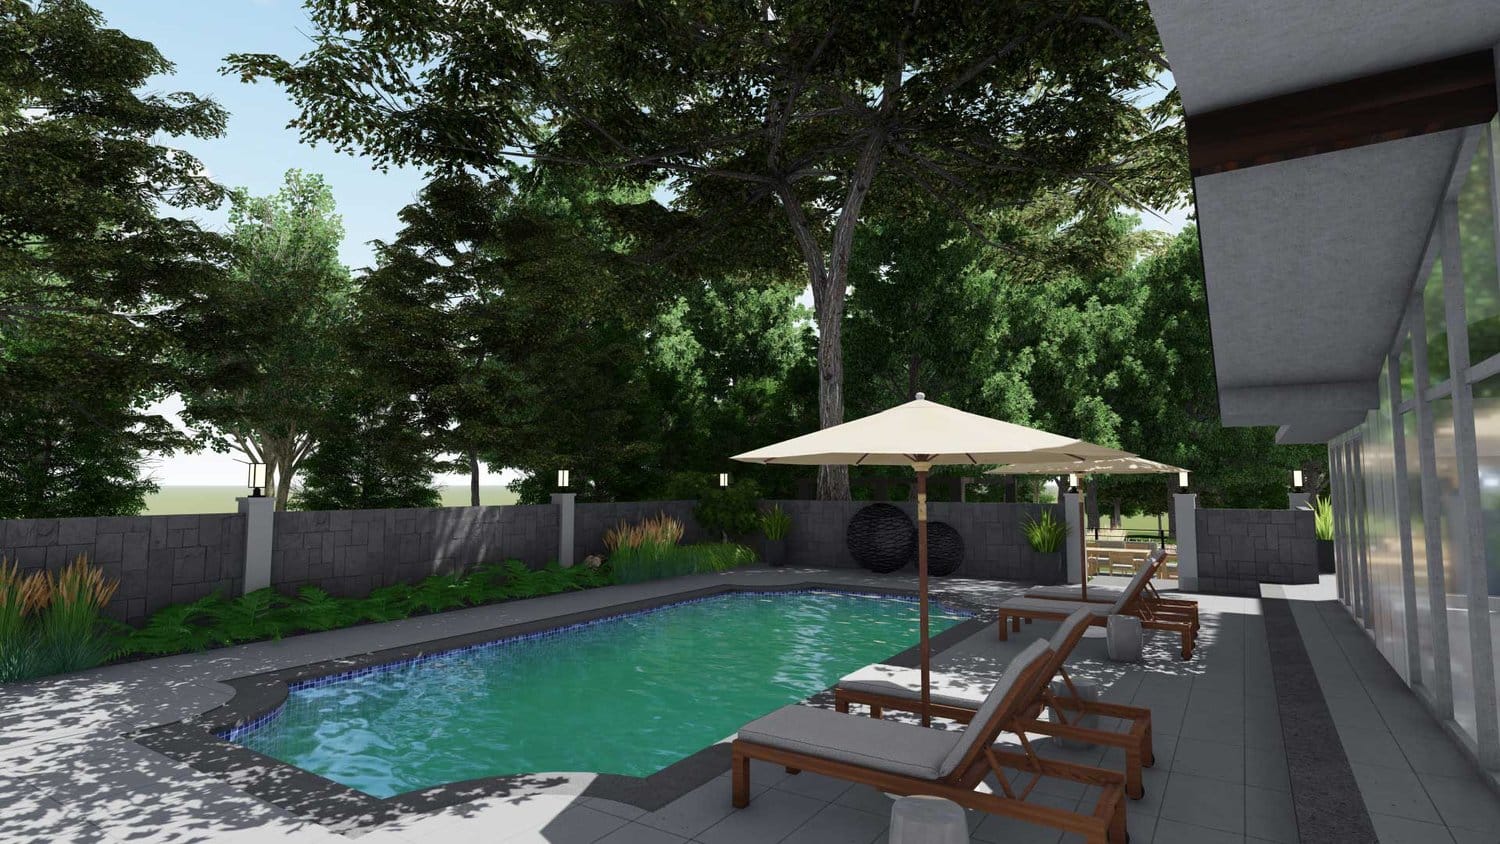 New Canaan yard with pool and lounge chairs with shade